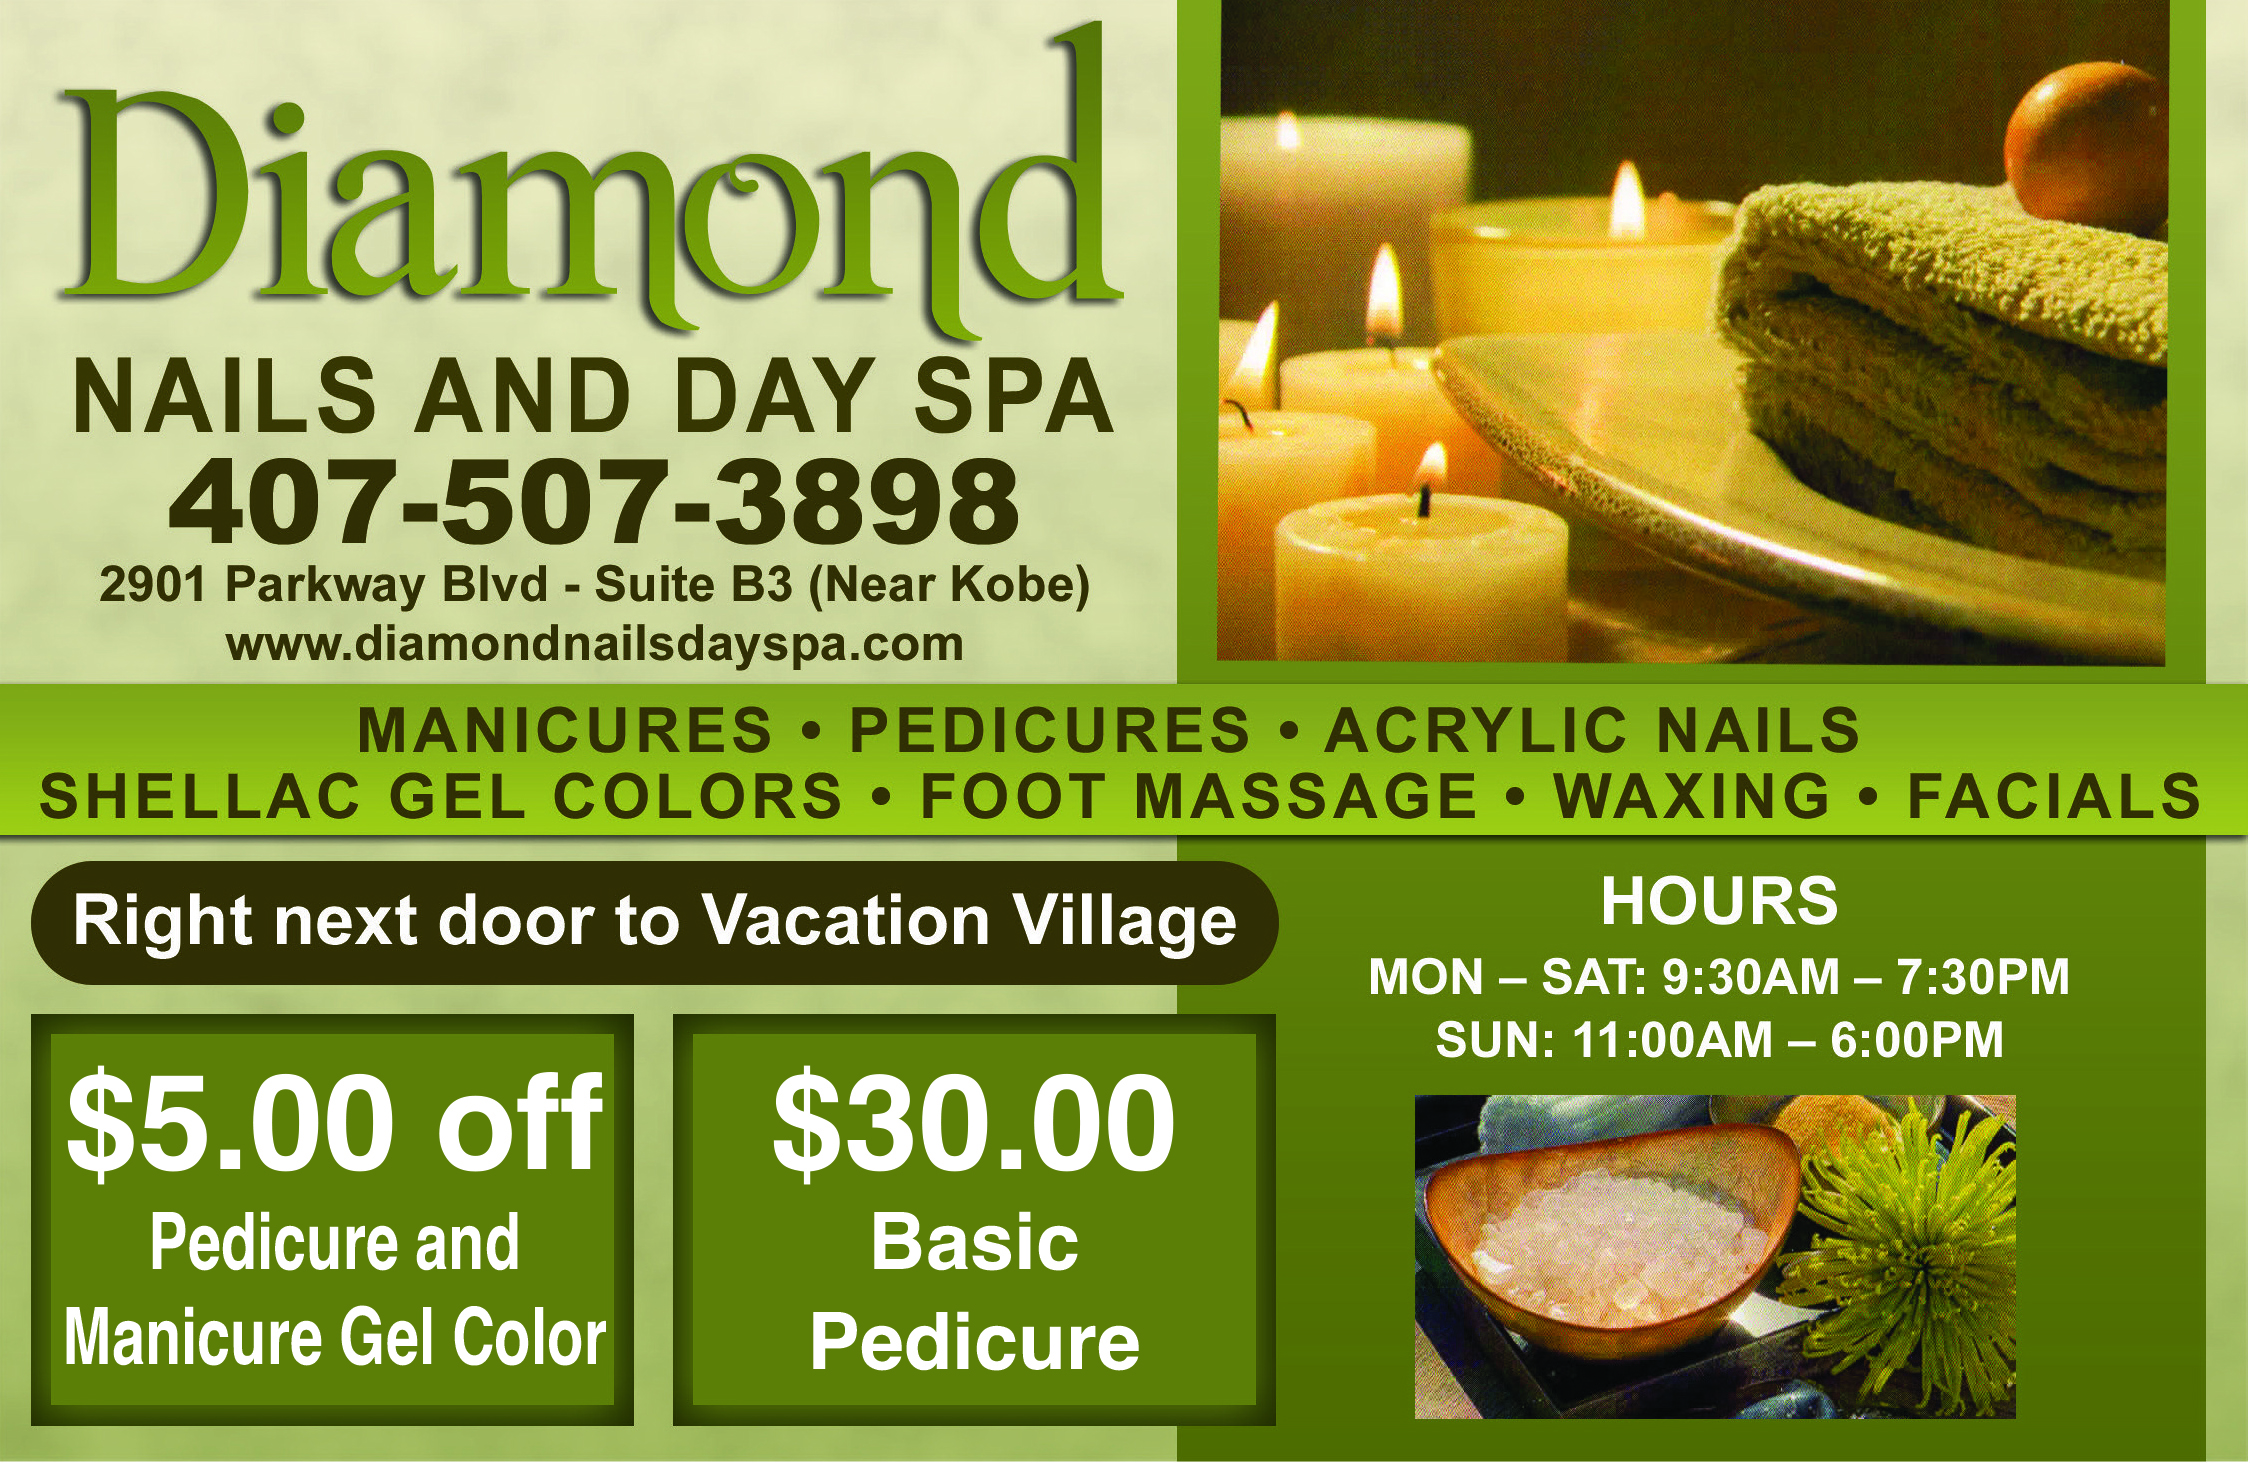 Diamond Nails and Day Spa